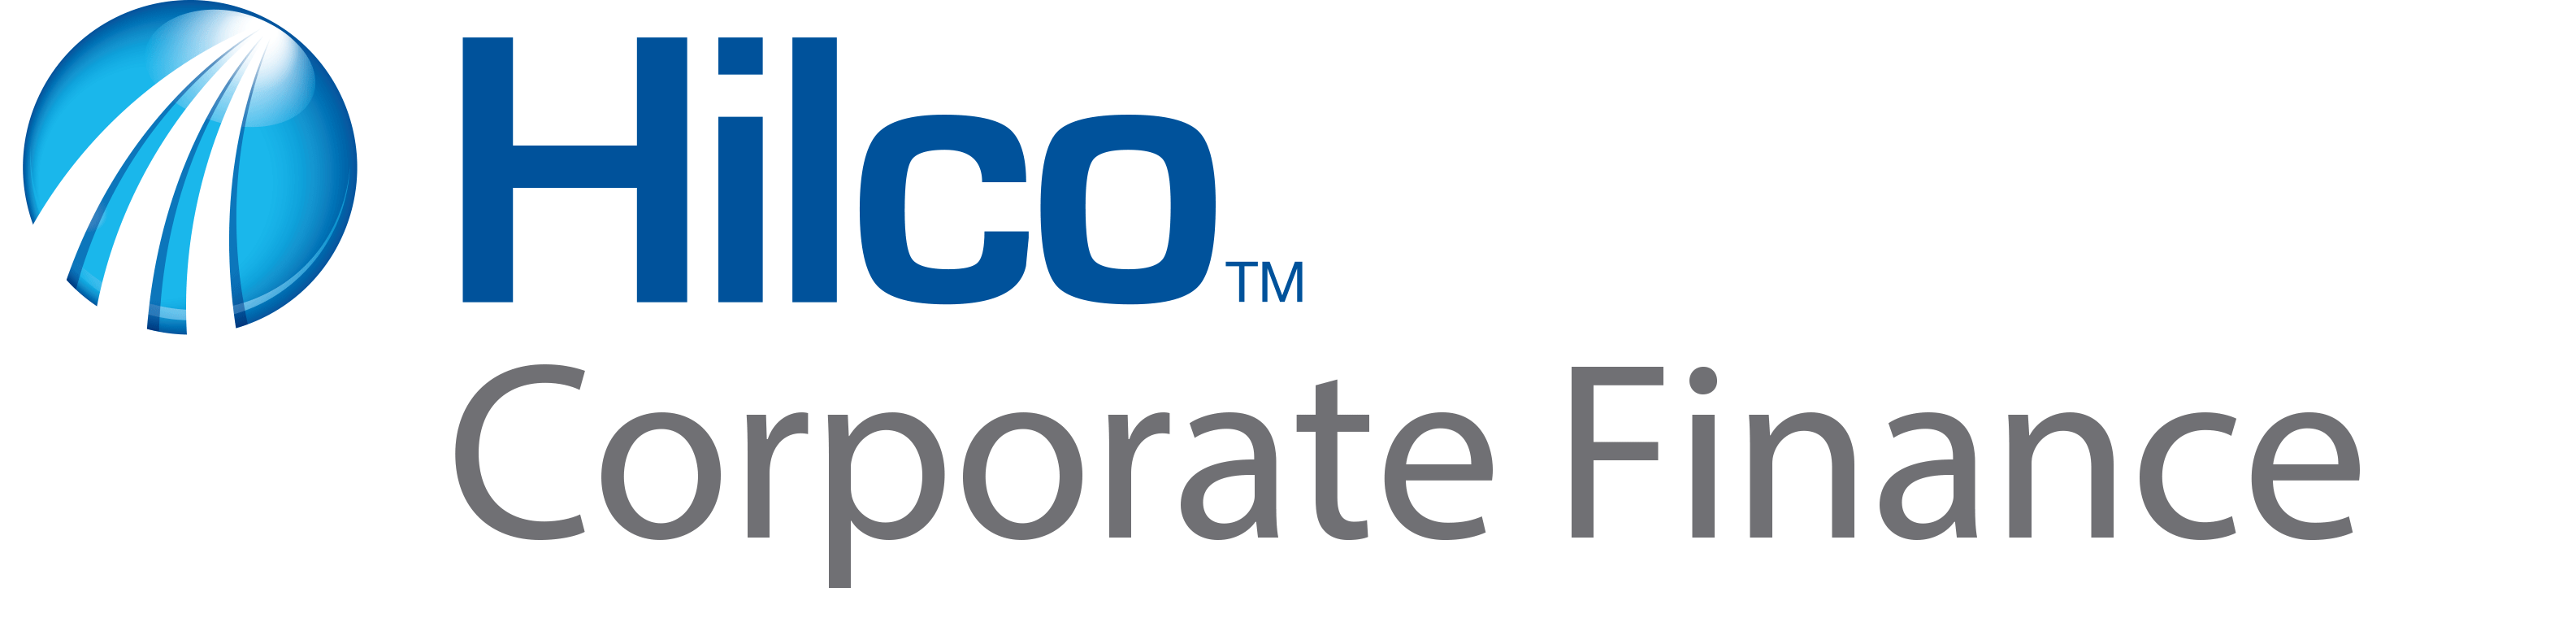 Corporate Finance Logo - Hilco Global Solutions & Financial Services